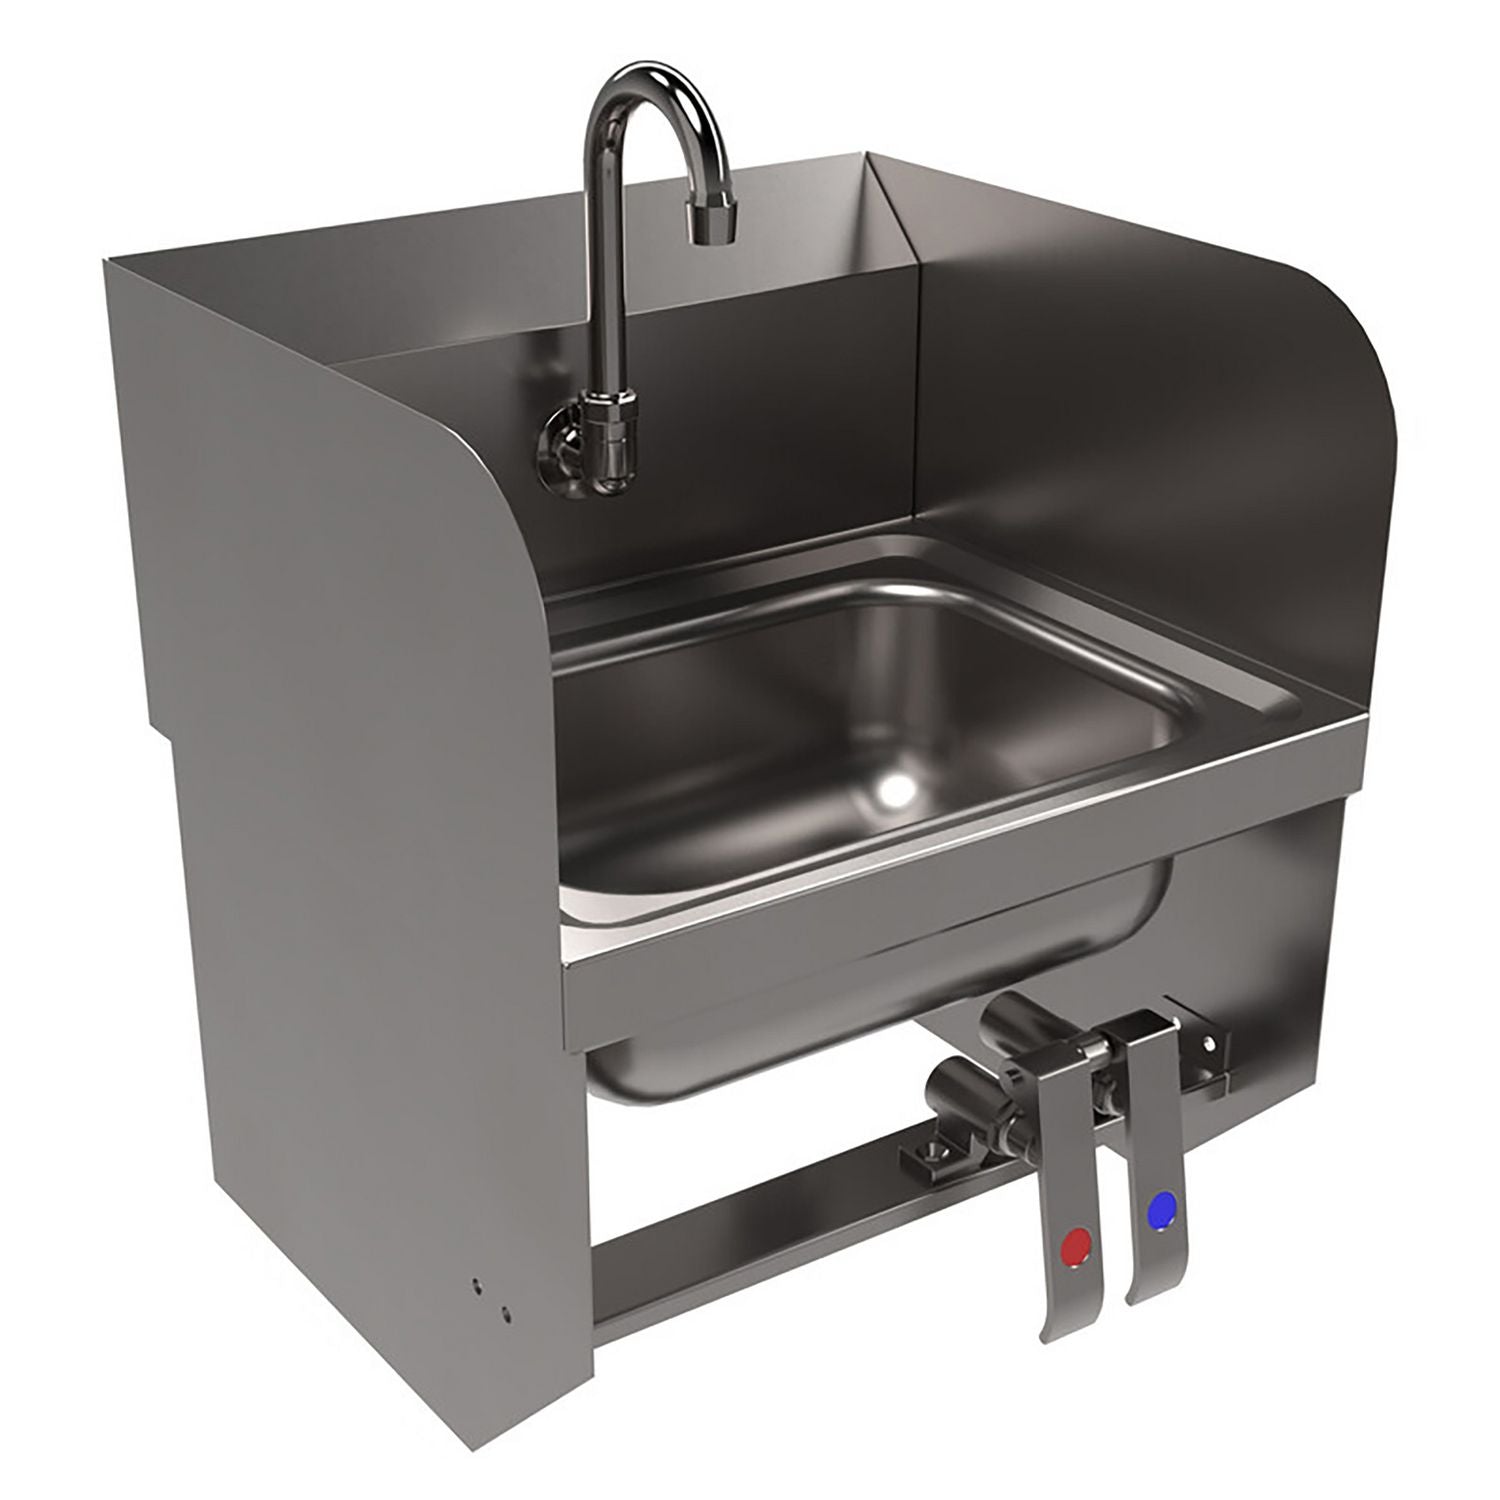 stainless-steel-hand-sink-with-side-splashes-14-l-x-10-w-x-5-d-ships-in-4-6-business-days_bkehsw14101sbkp - 2